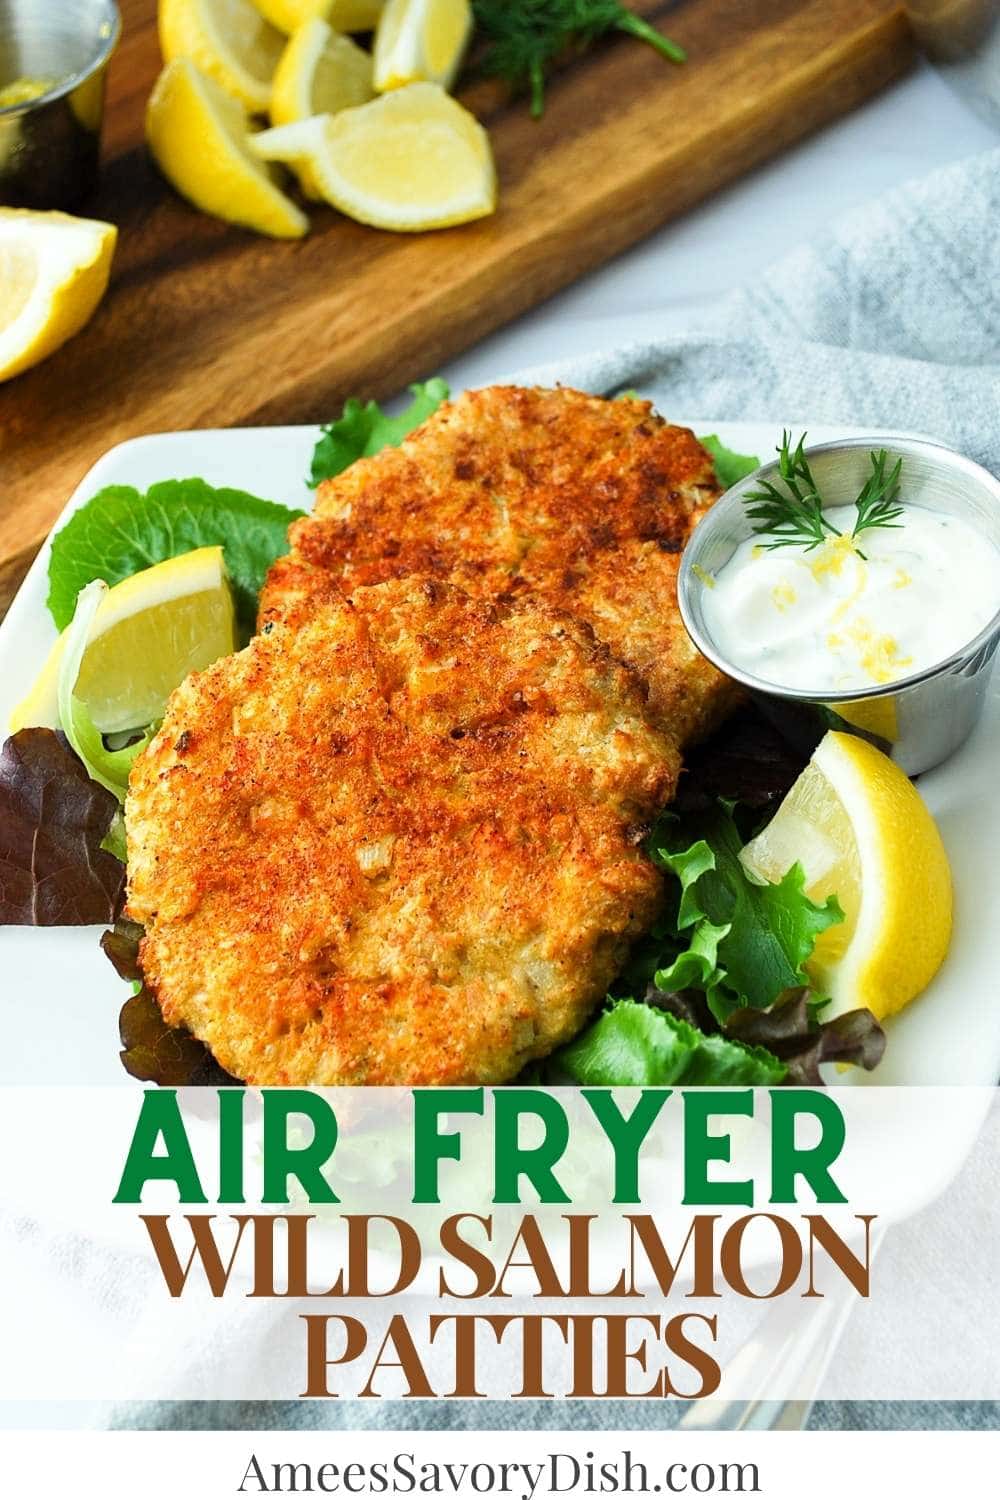 A simple recipe for air-fried salmon patties topped with a flavorful lemon dill yogurt sauce made with wild Alaskan salmon and gluten-free breadcrumbs. #salmonpatties #wildsalmon #wildsalmonrecipe #yogurtdillsauce via @Ameessavorydish